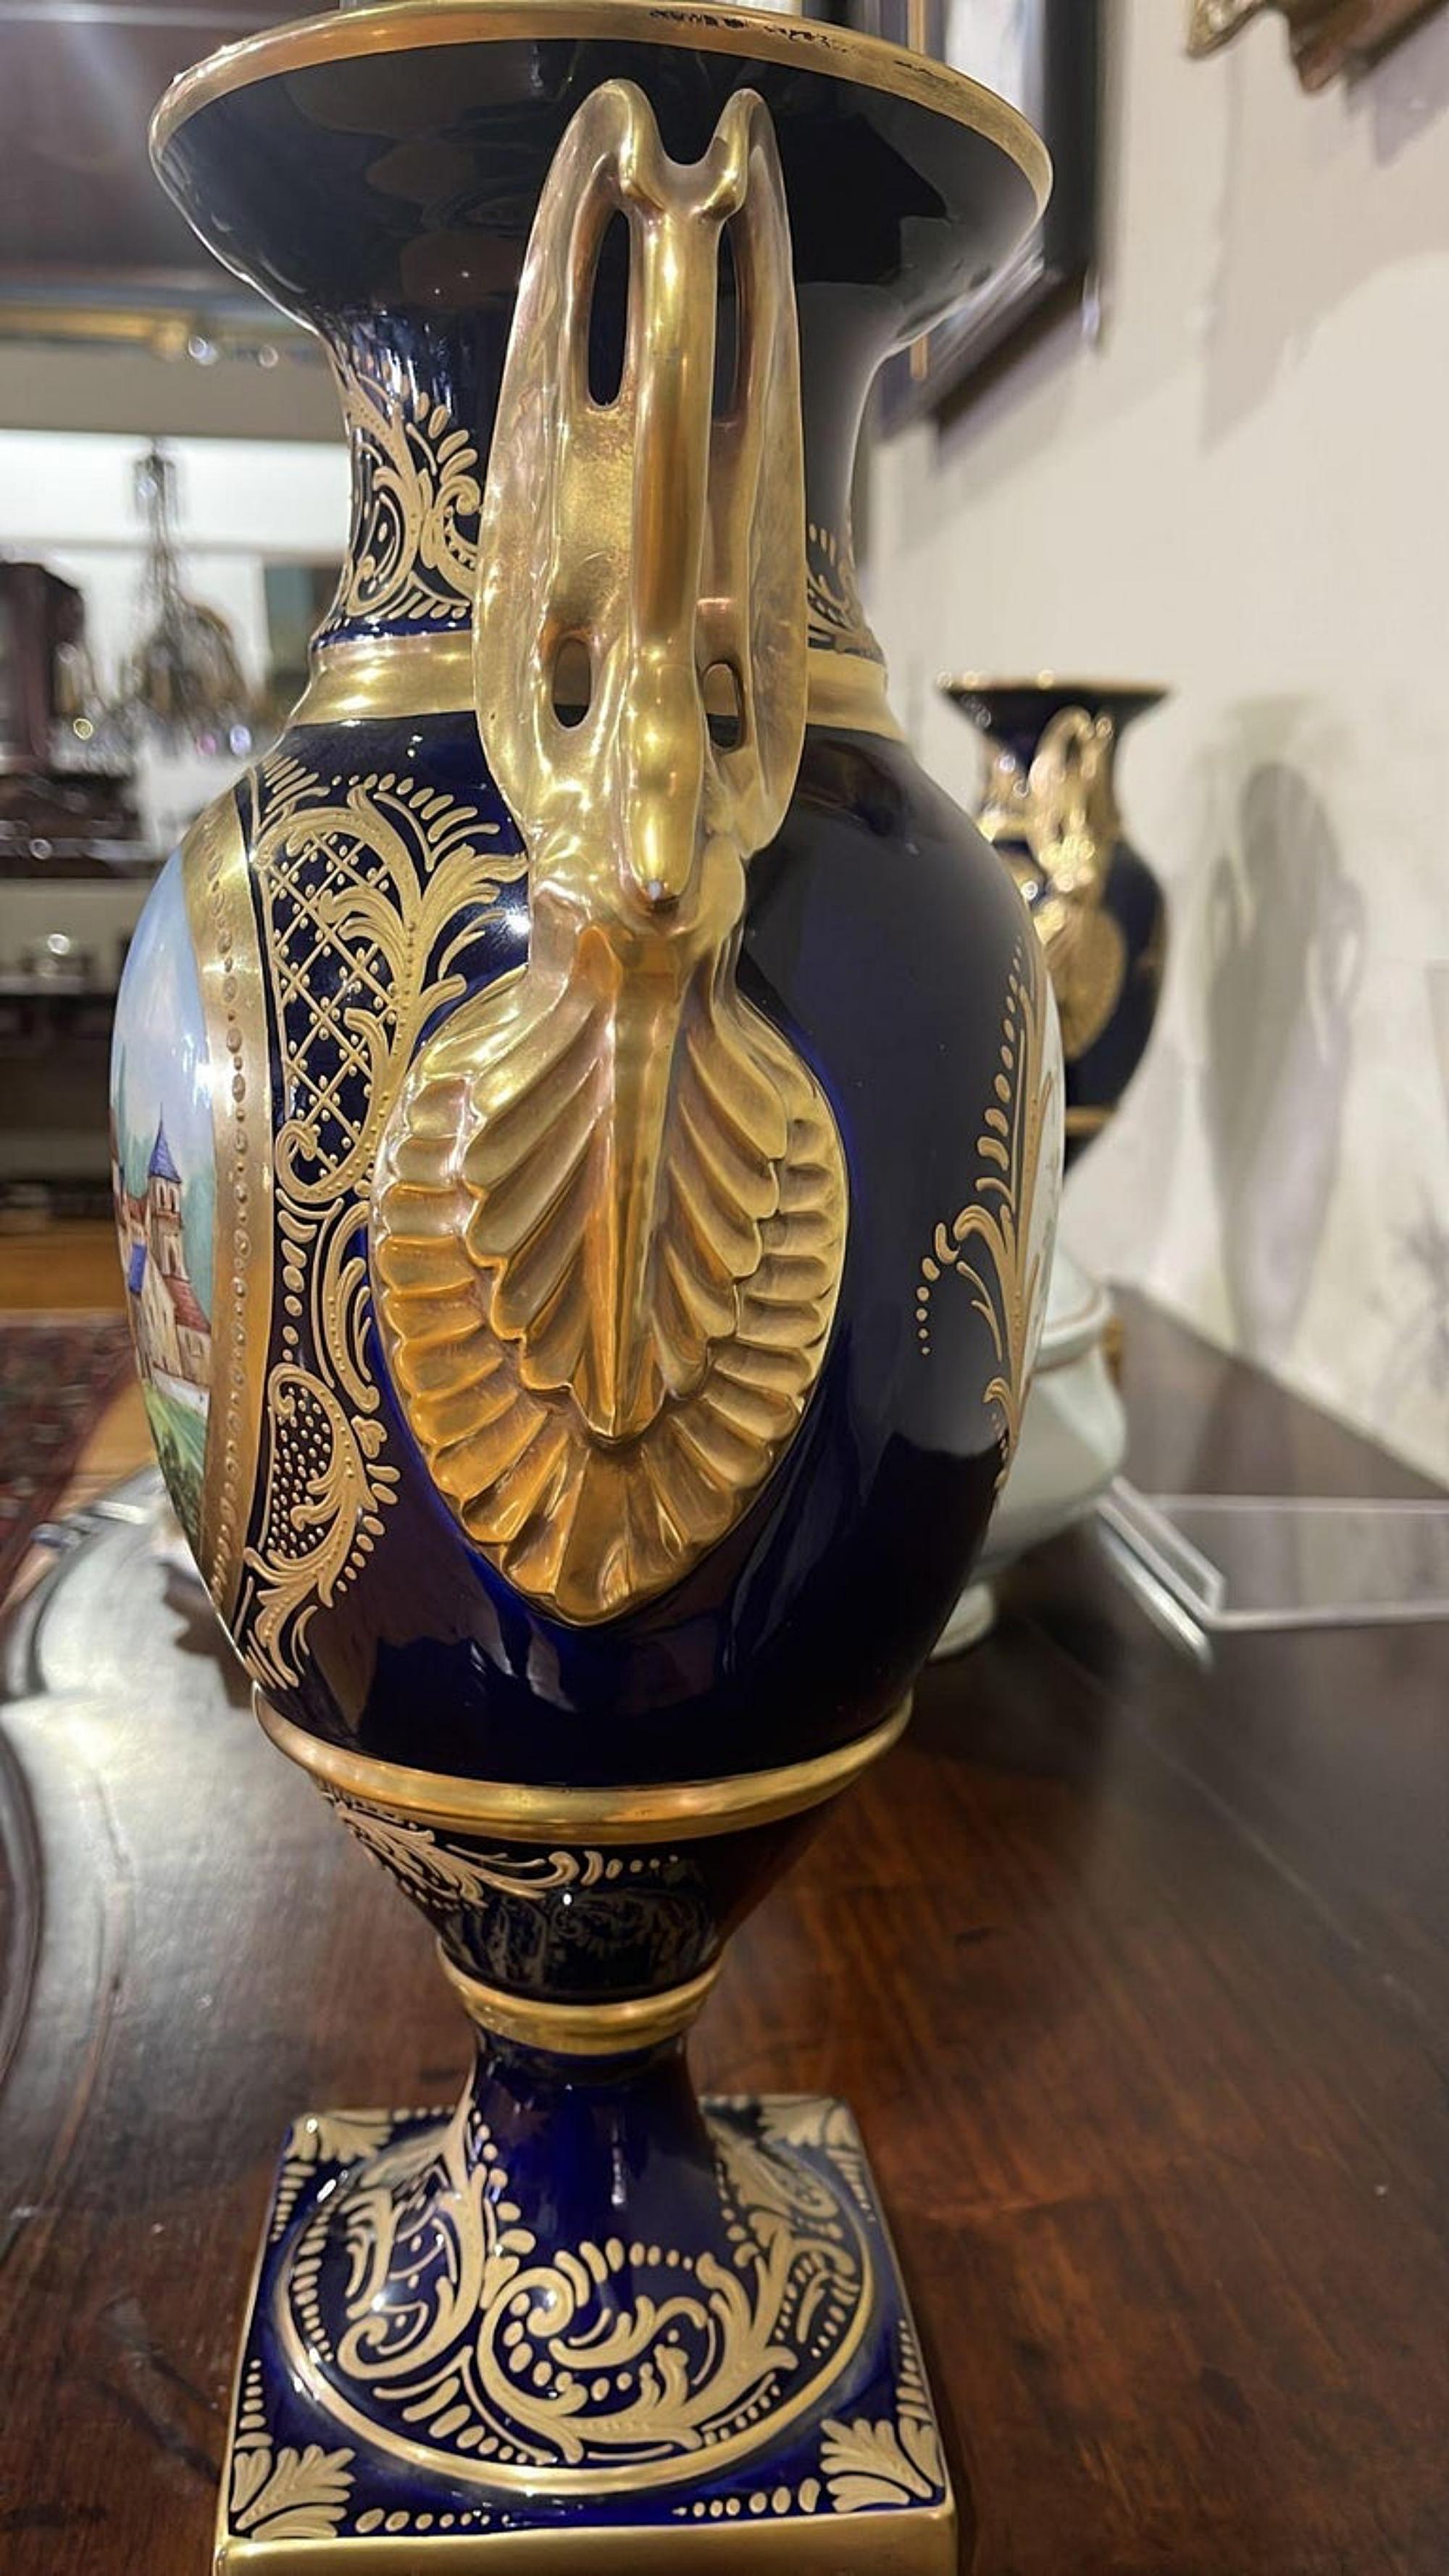 Pair of vases

French, early 20th century in Sèvres porcelain, cobalt blue and gilt decoration with polychrome reserves 